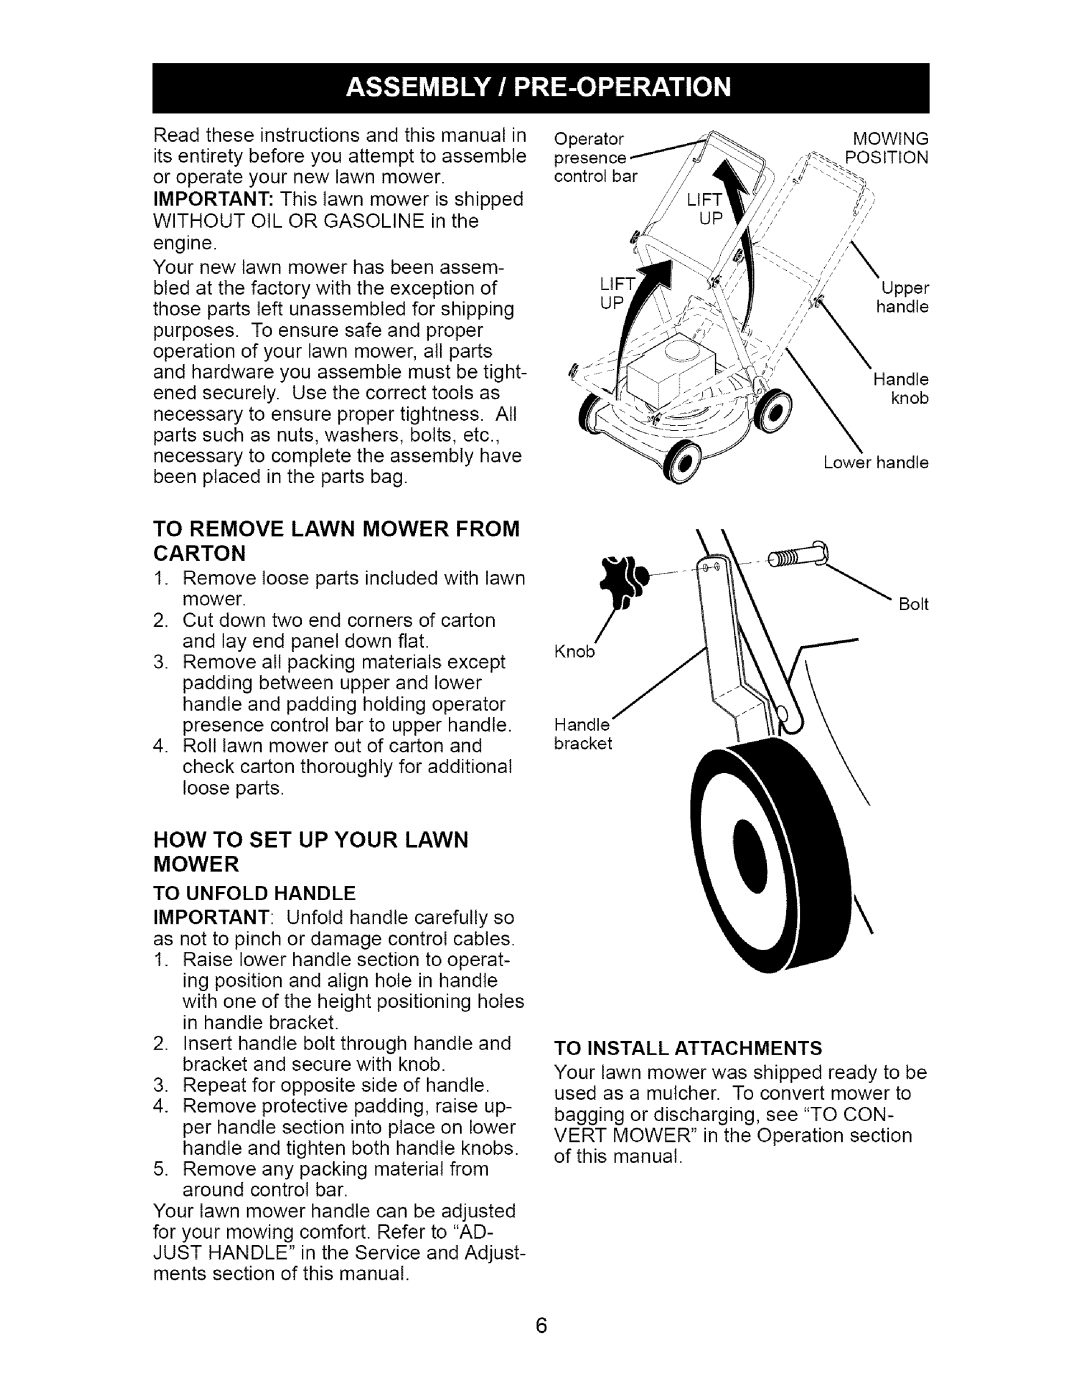 Craftsman 917.377011 How To Set Up Your Lawn Mower, To Remove Lawn Mower From, To Unfold Handle, To Install Attachments 